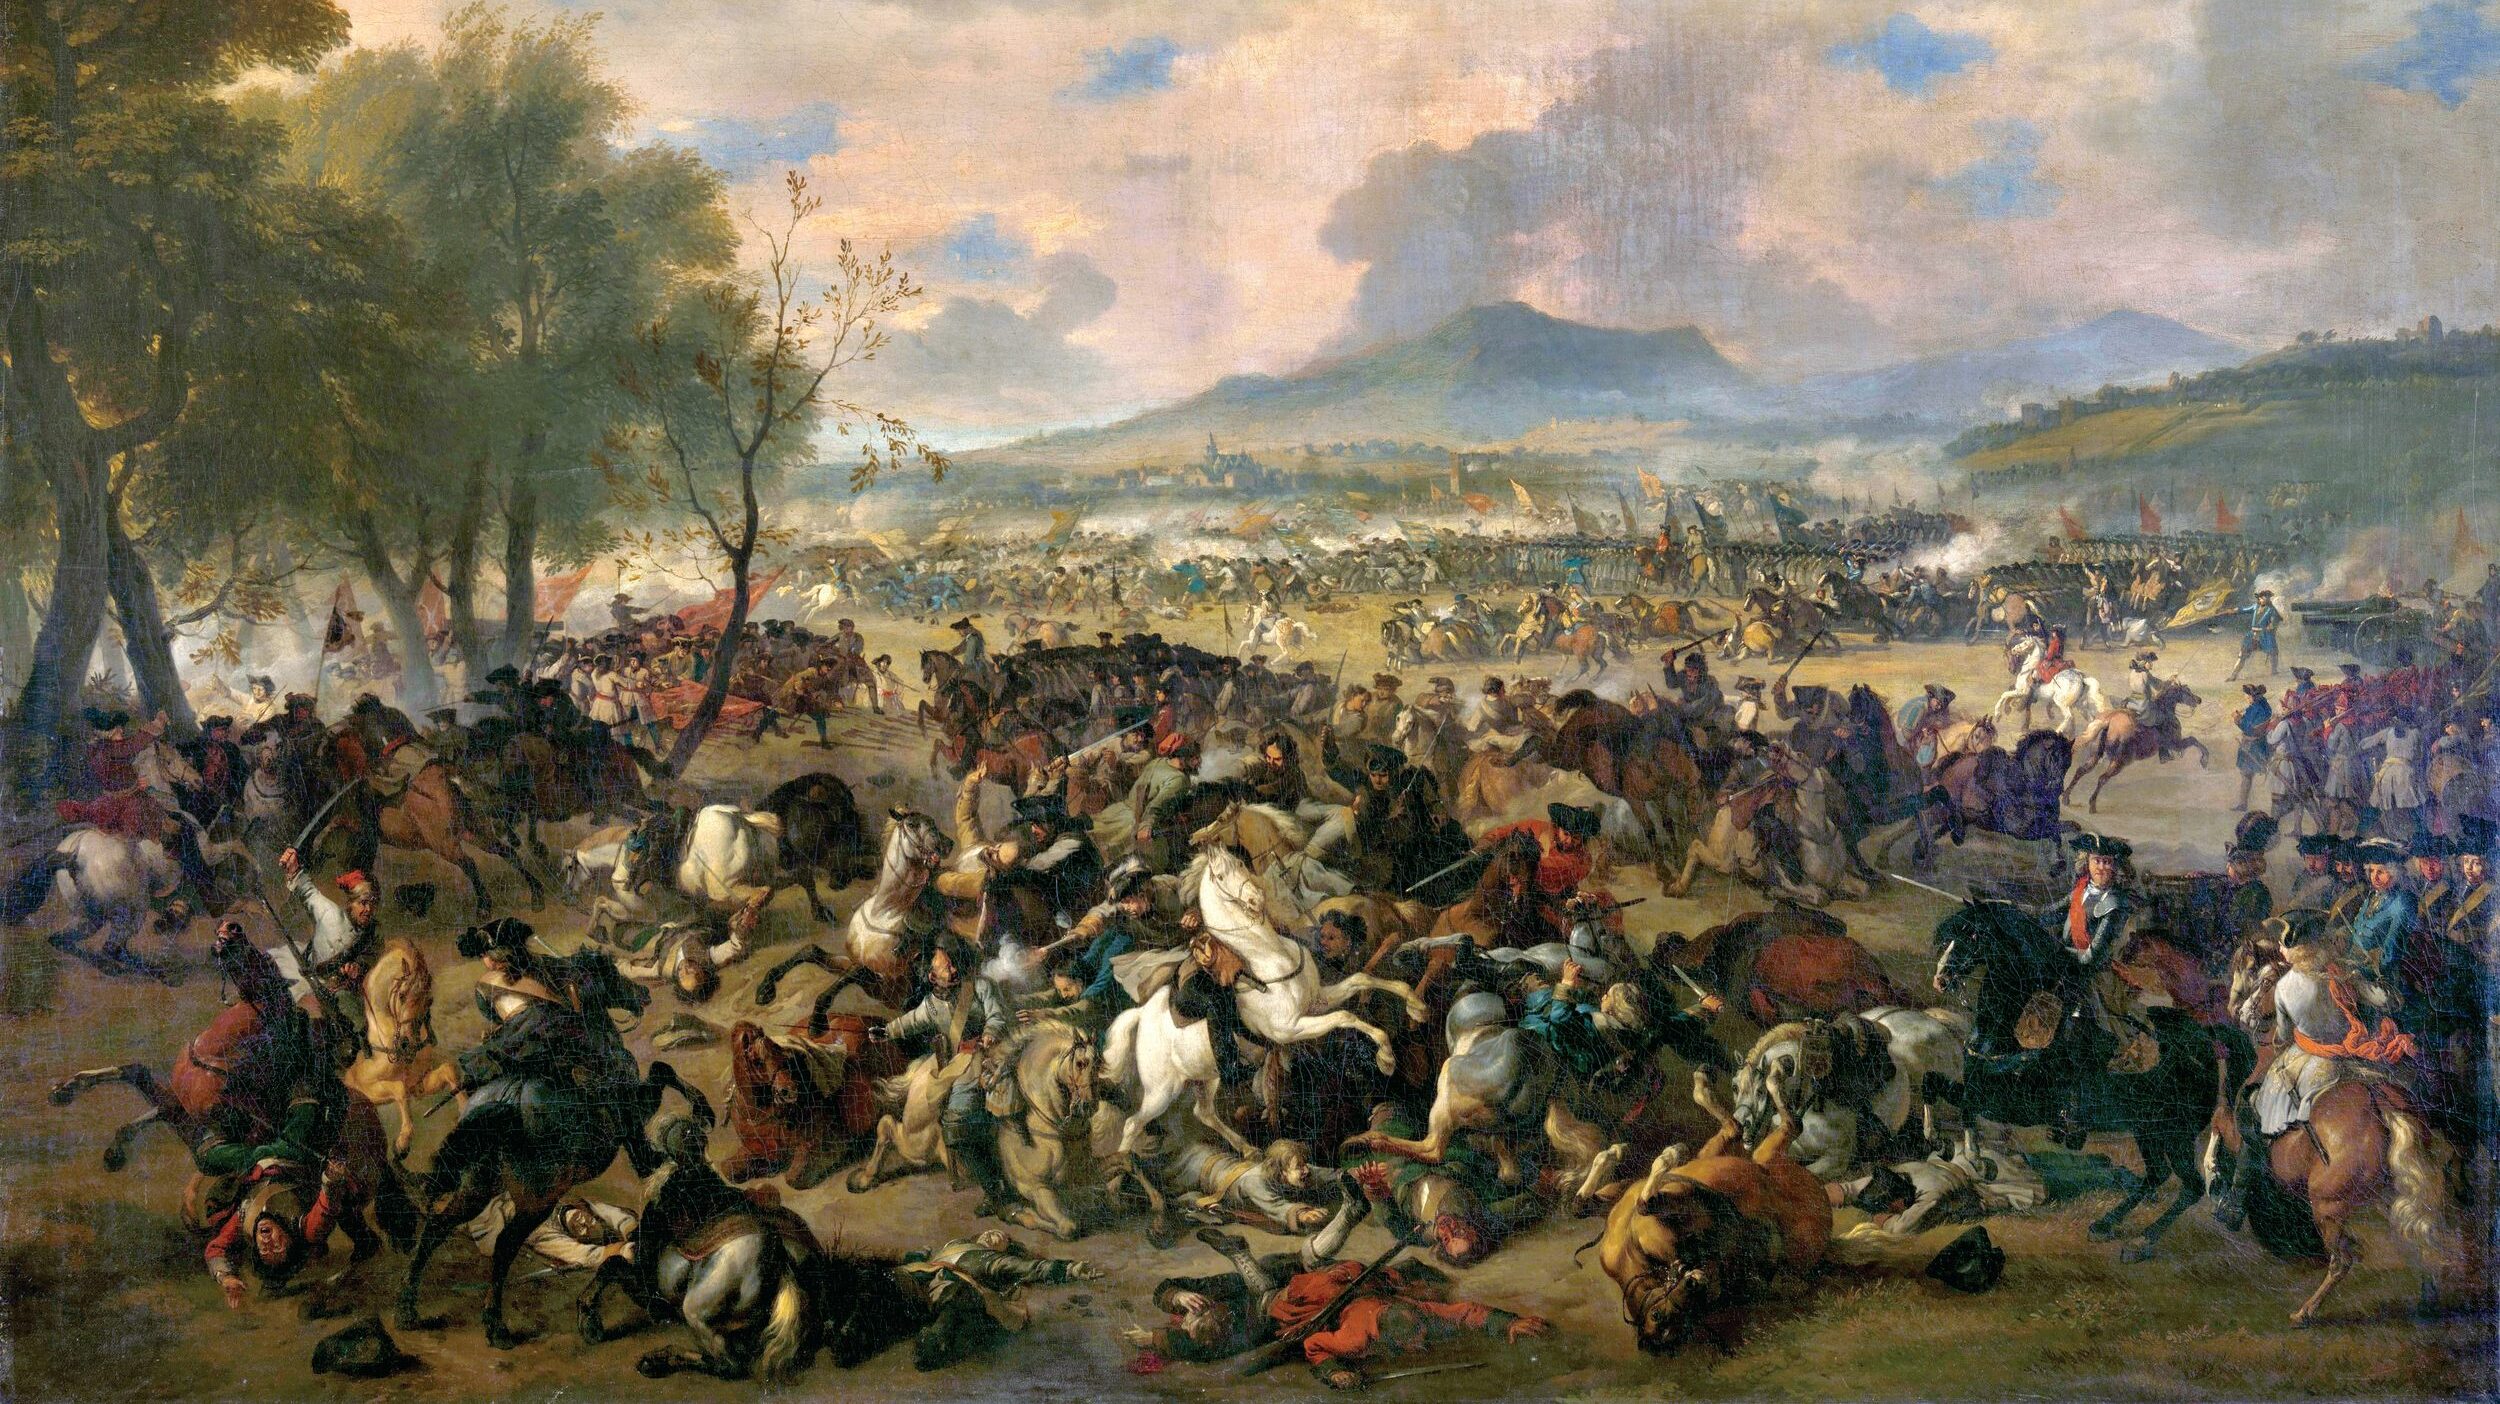 The Duke of Villeroi committed the bulk of his cavalry in a fearsome counterattack on the open plain south of Ramillies late in the battle in a quest to shatter the Allied center.